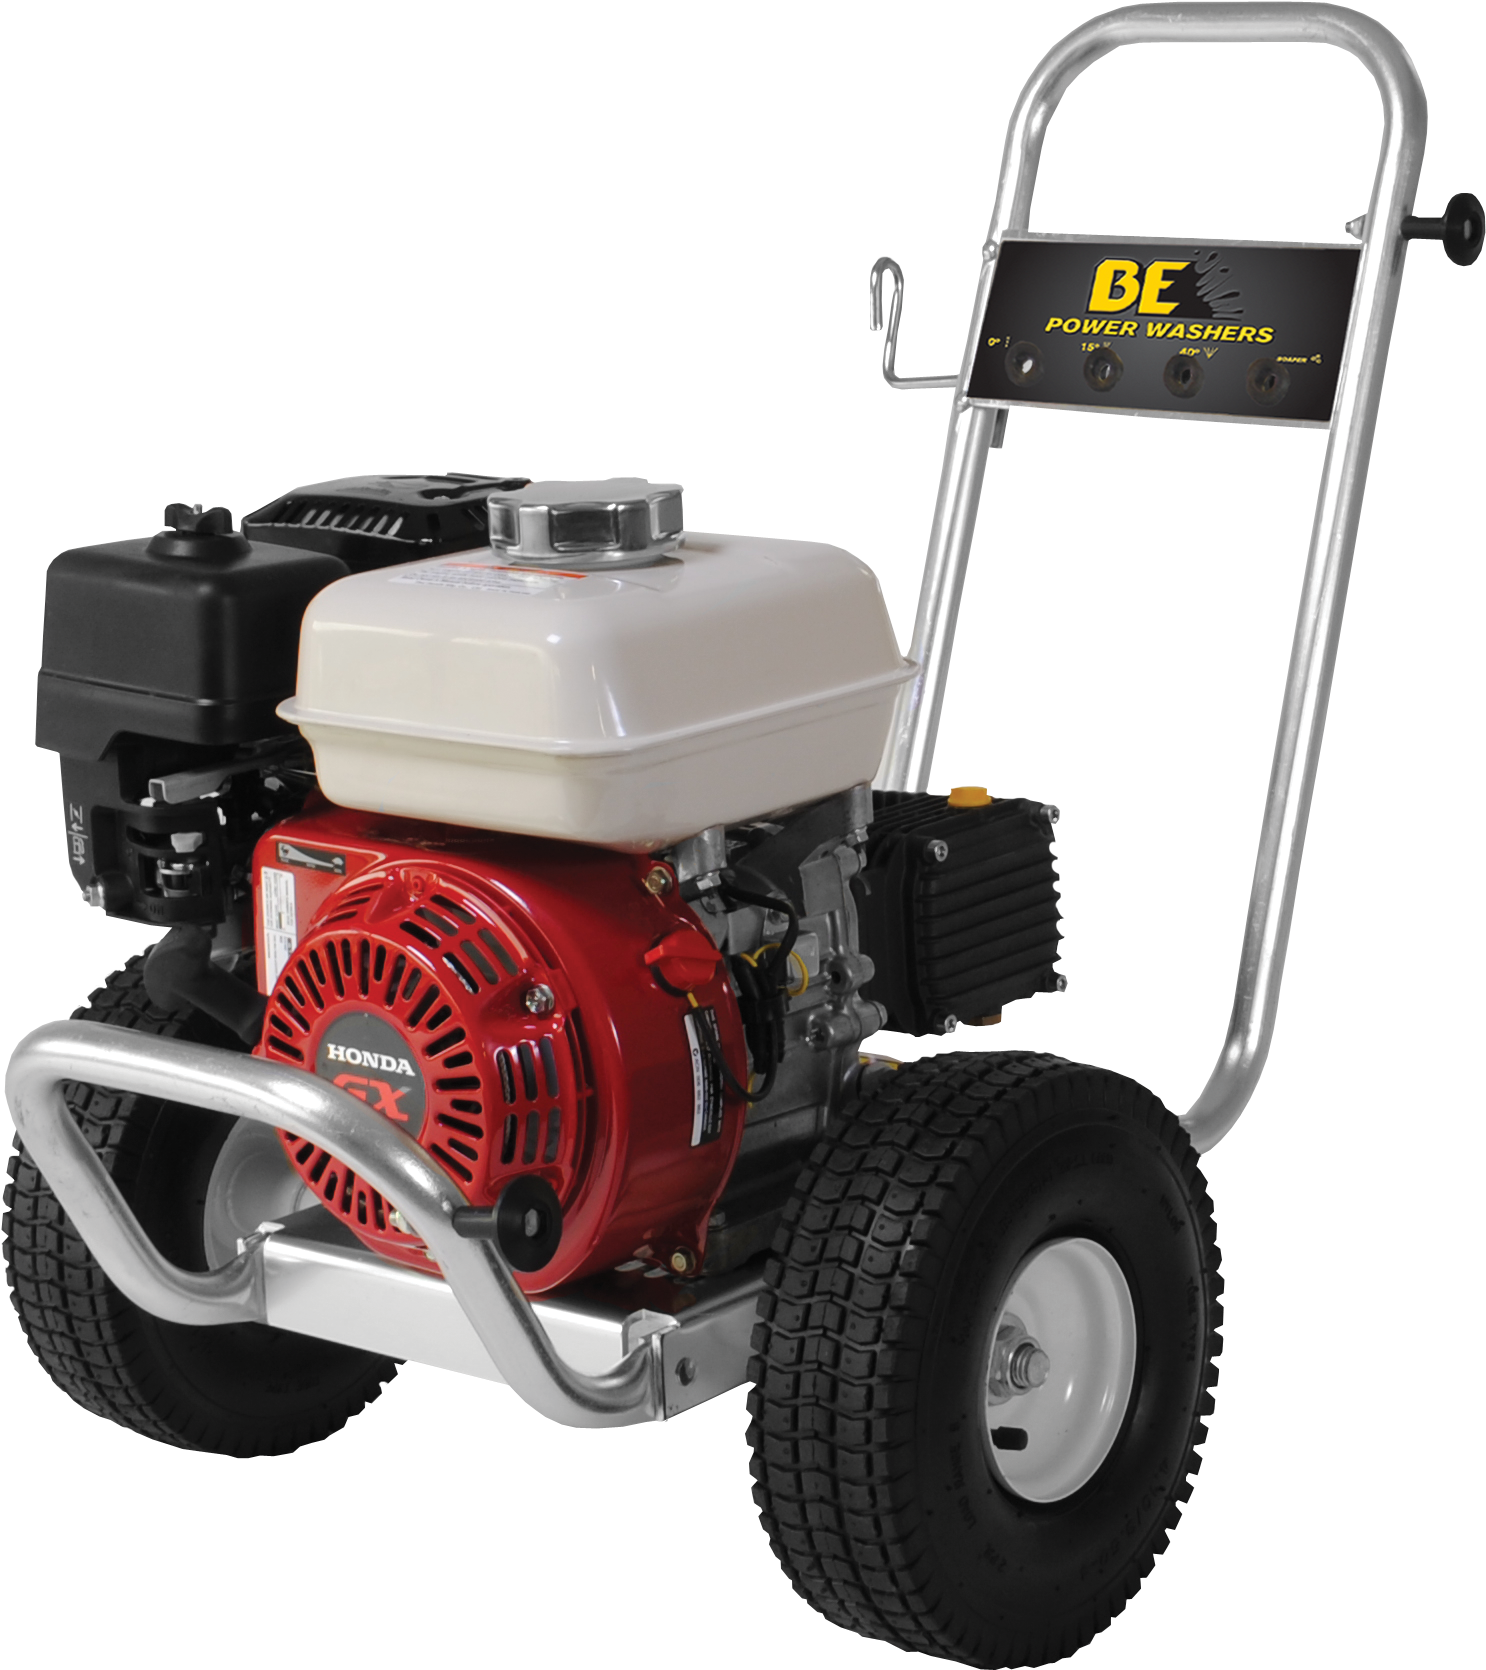 Gas Powered Pressure Washer PNG image